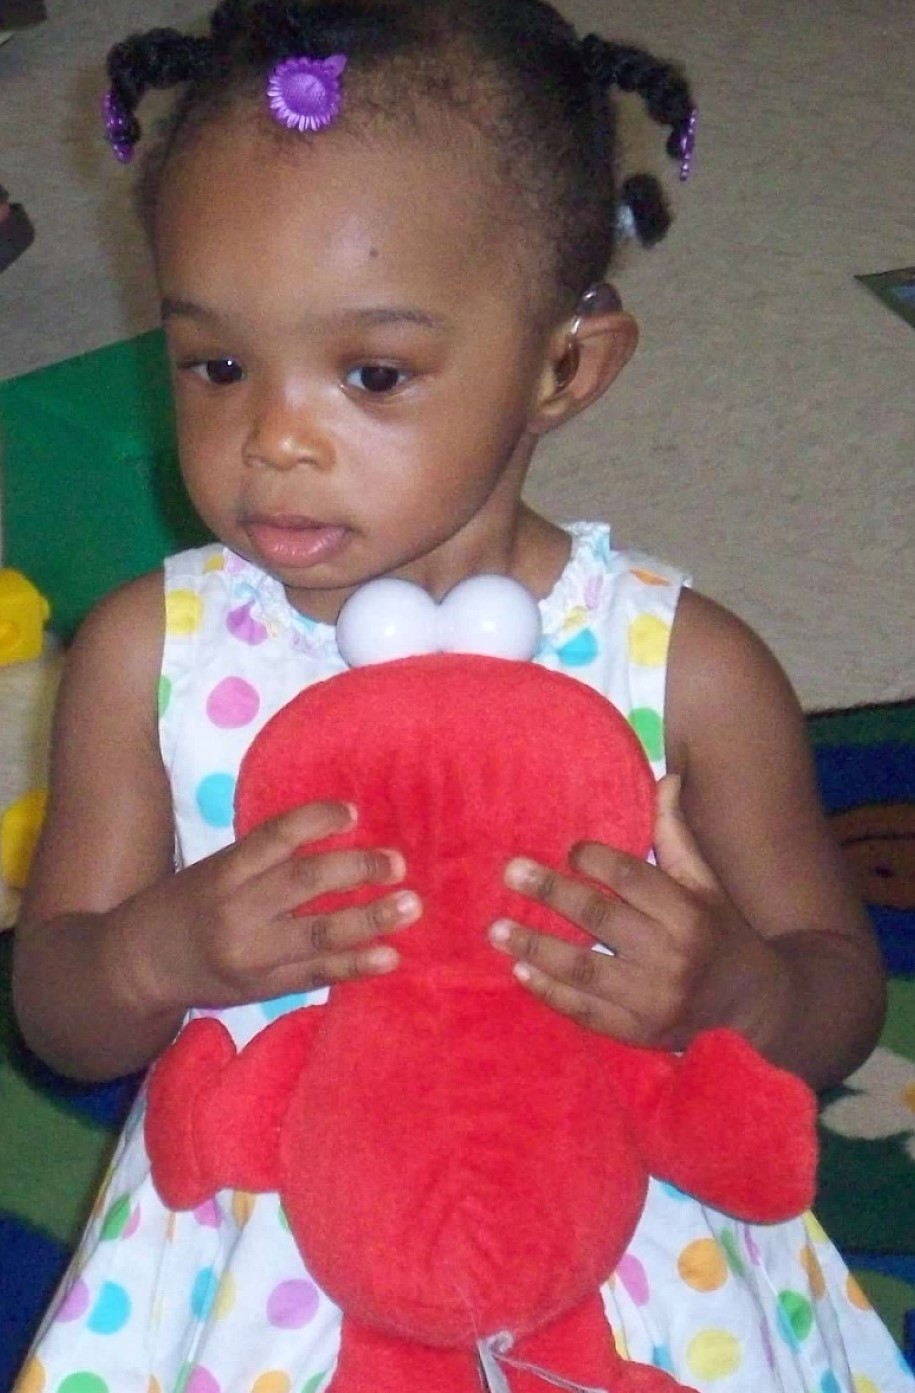 Photograph: A toddler with a hearing aid holds a red stuffed animal.